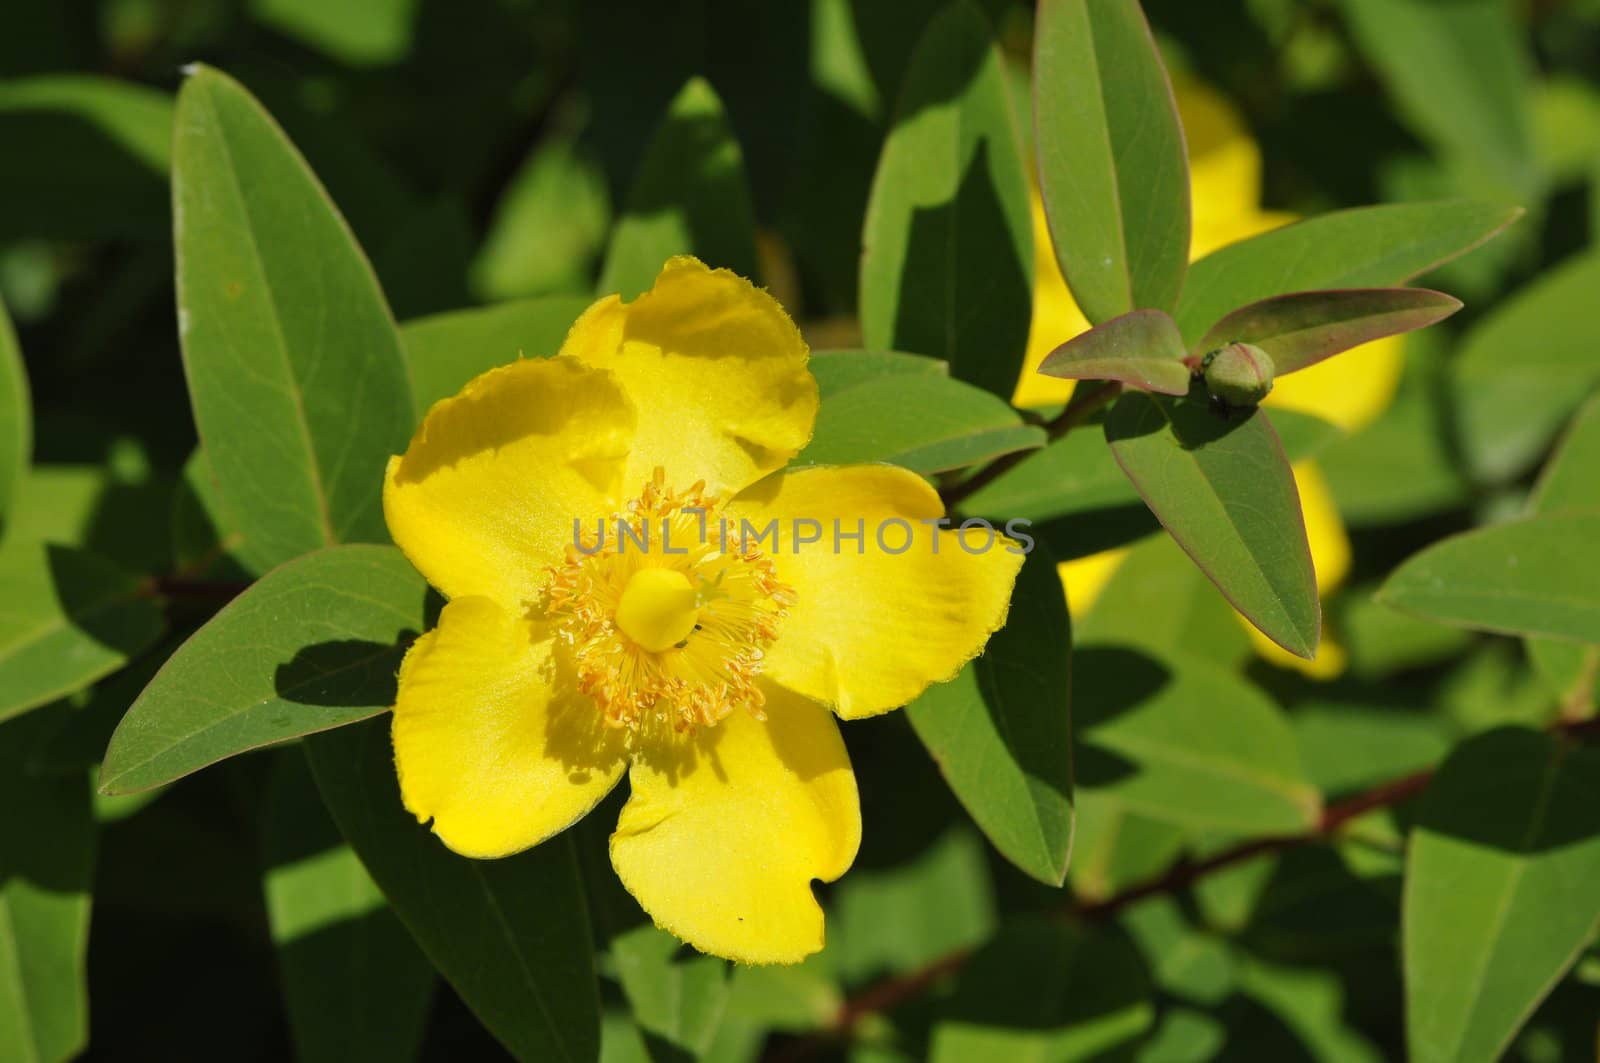 Big yellow hypericum with green leafs by shkyo30